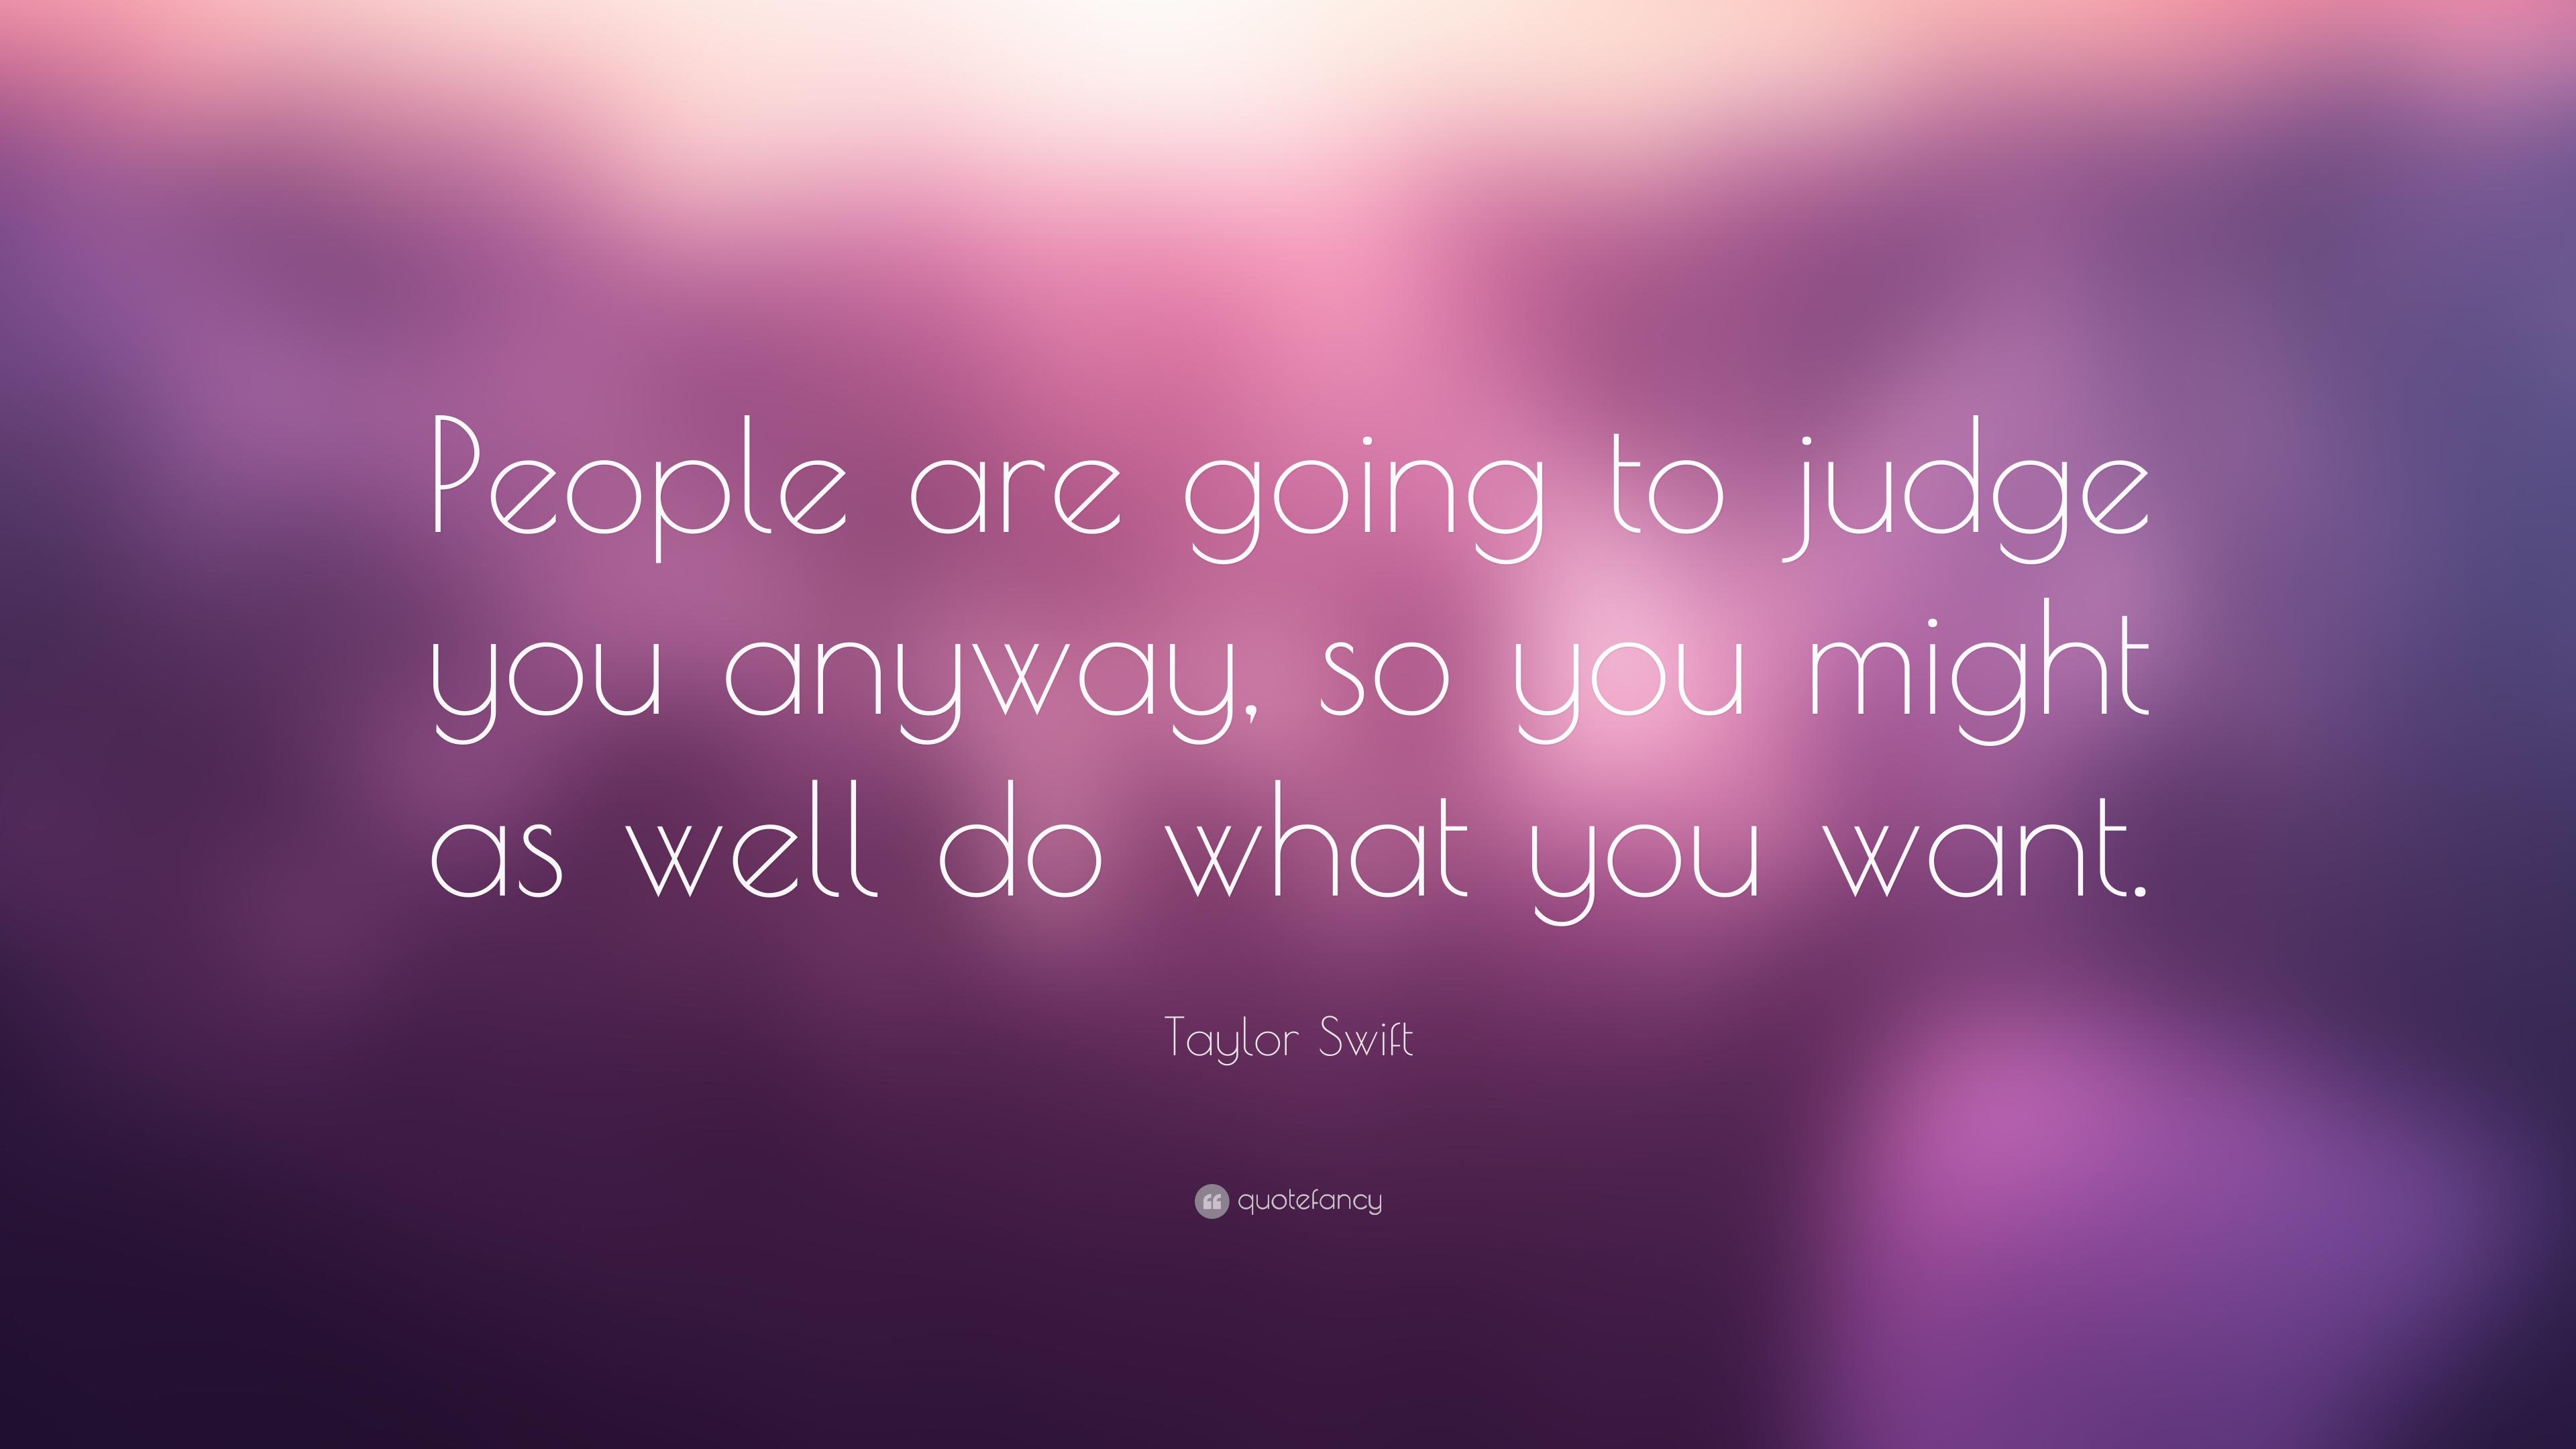 Taylor Swift Quote: “People are going to judge you anyway